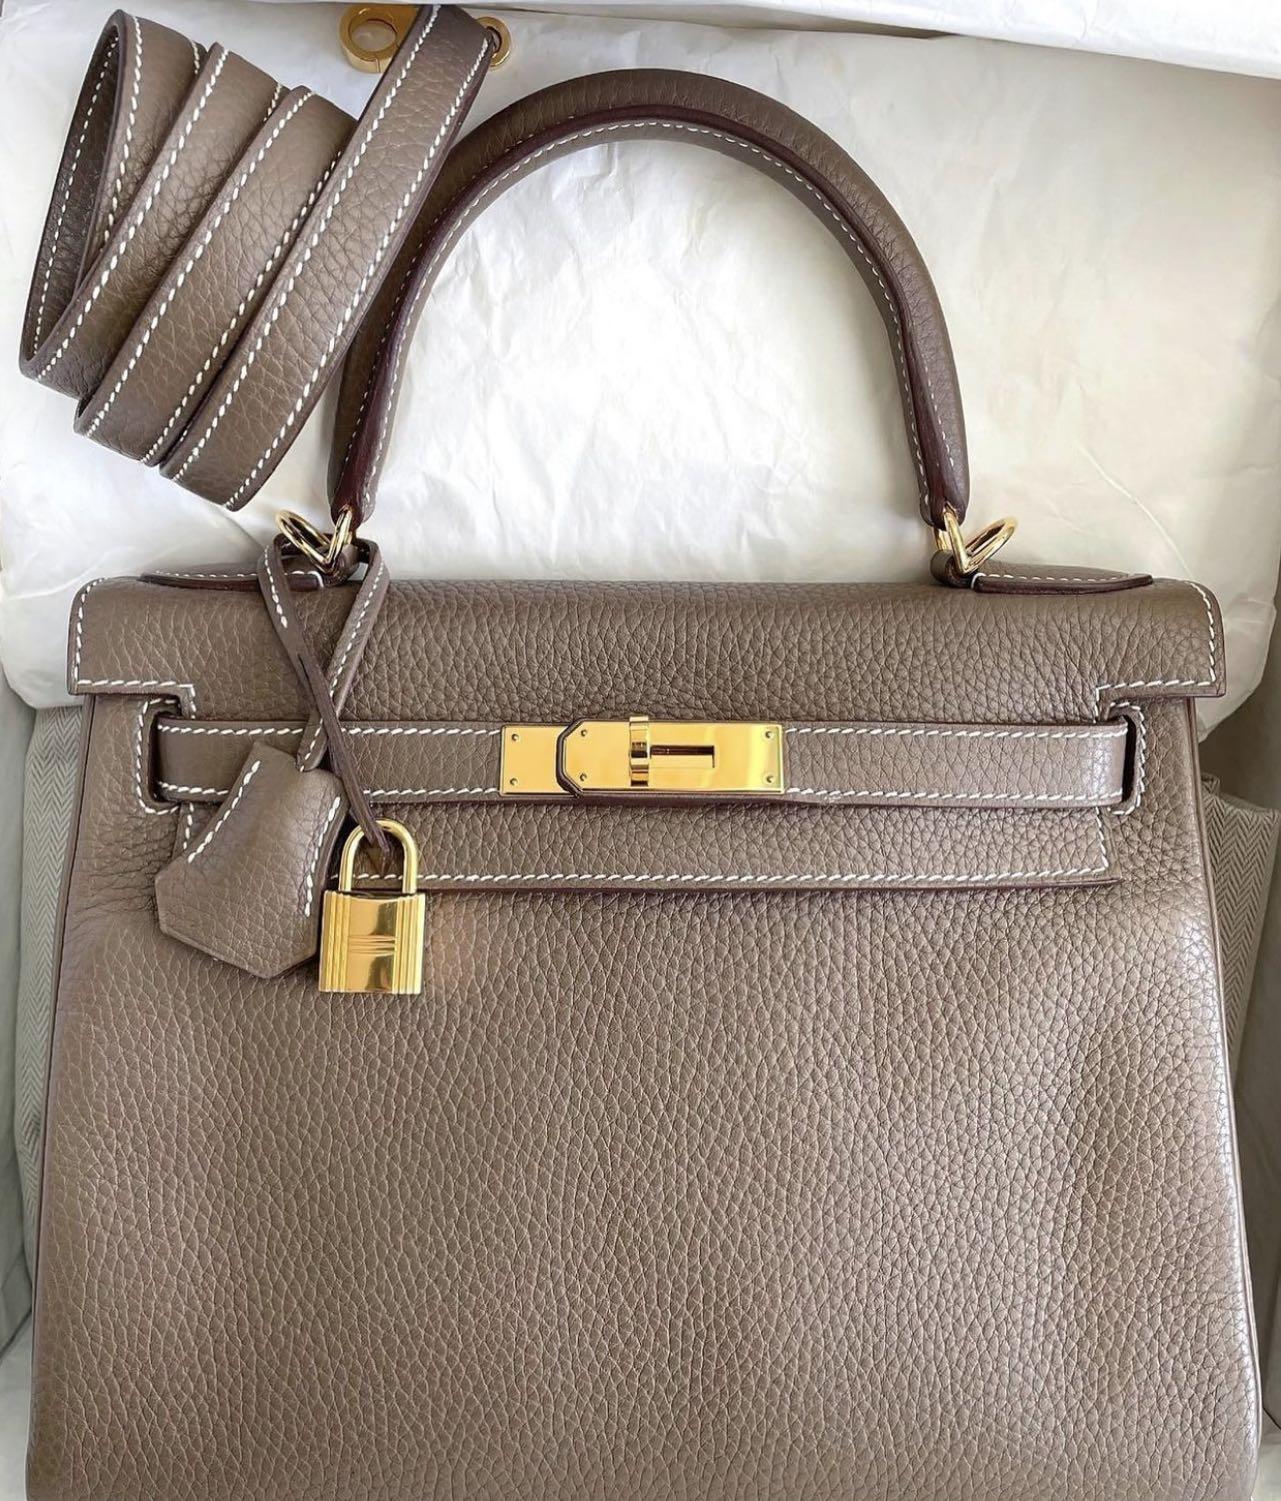 AUTHENTIC HERMES KELLY 28 ETOUPE CLEMENCE IN GOLD HARDWARE, Luxury